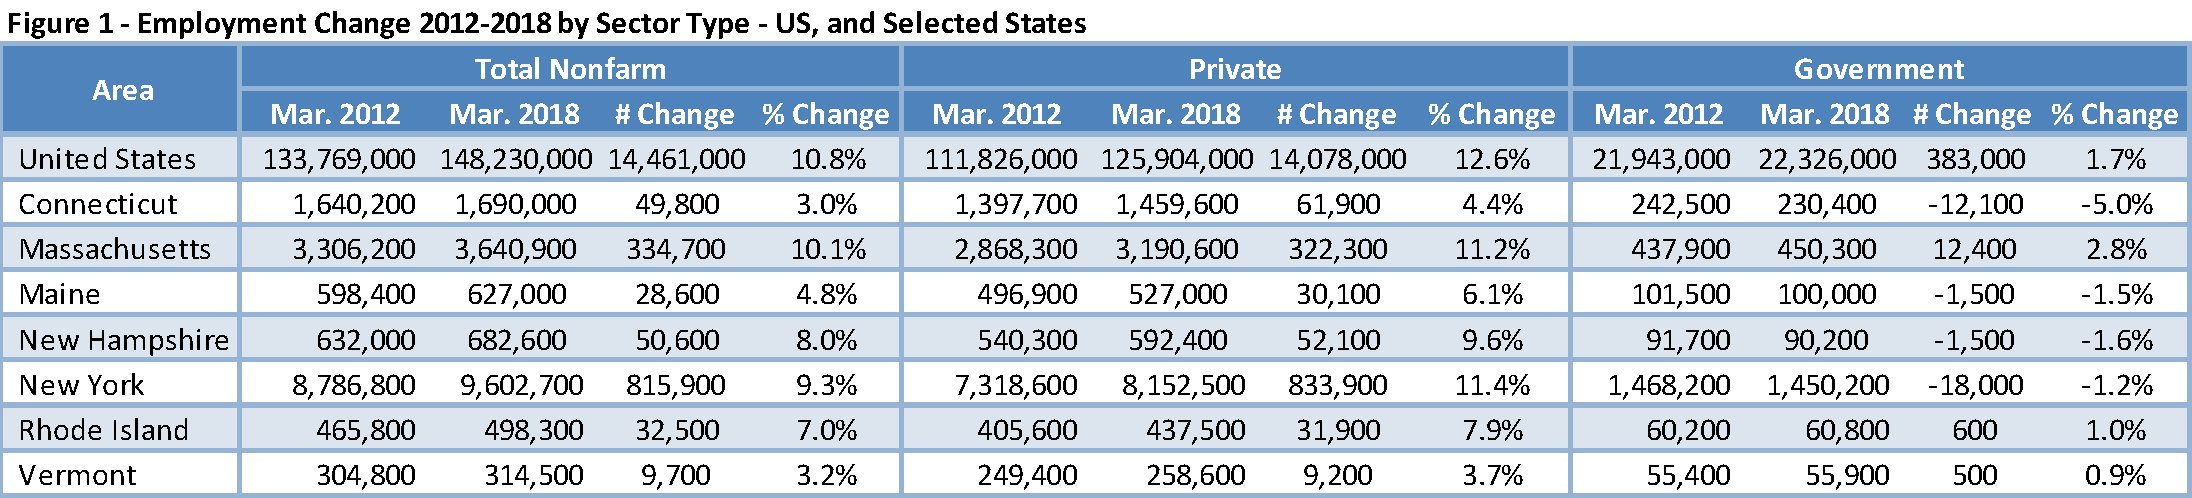 Figure 1 Employment Change 2012-2018 by Sector Type - US, and Selected States